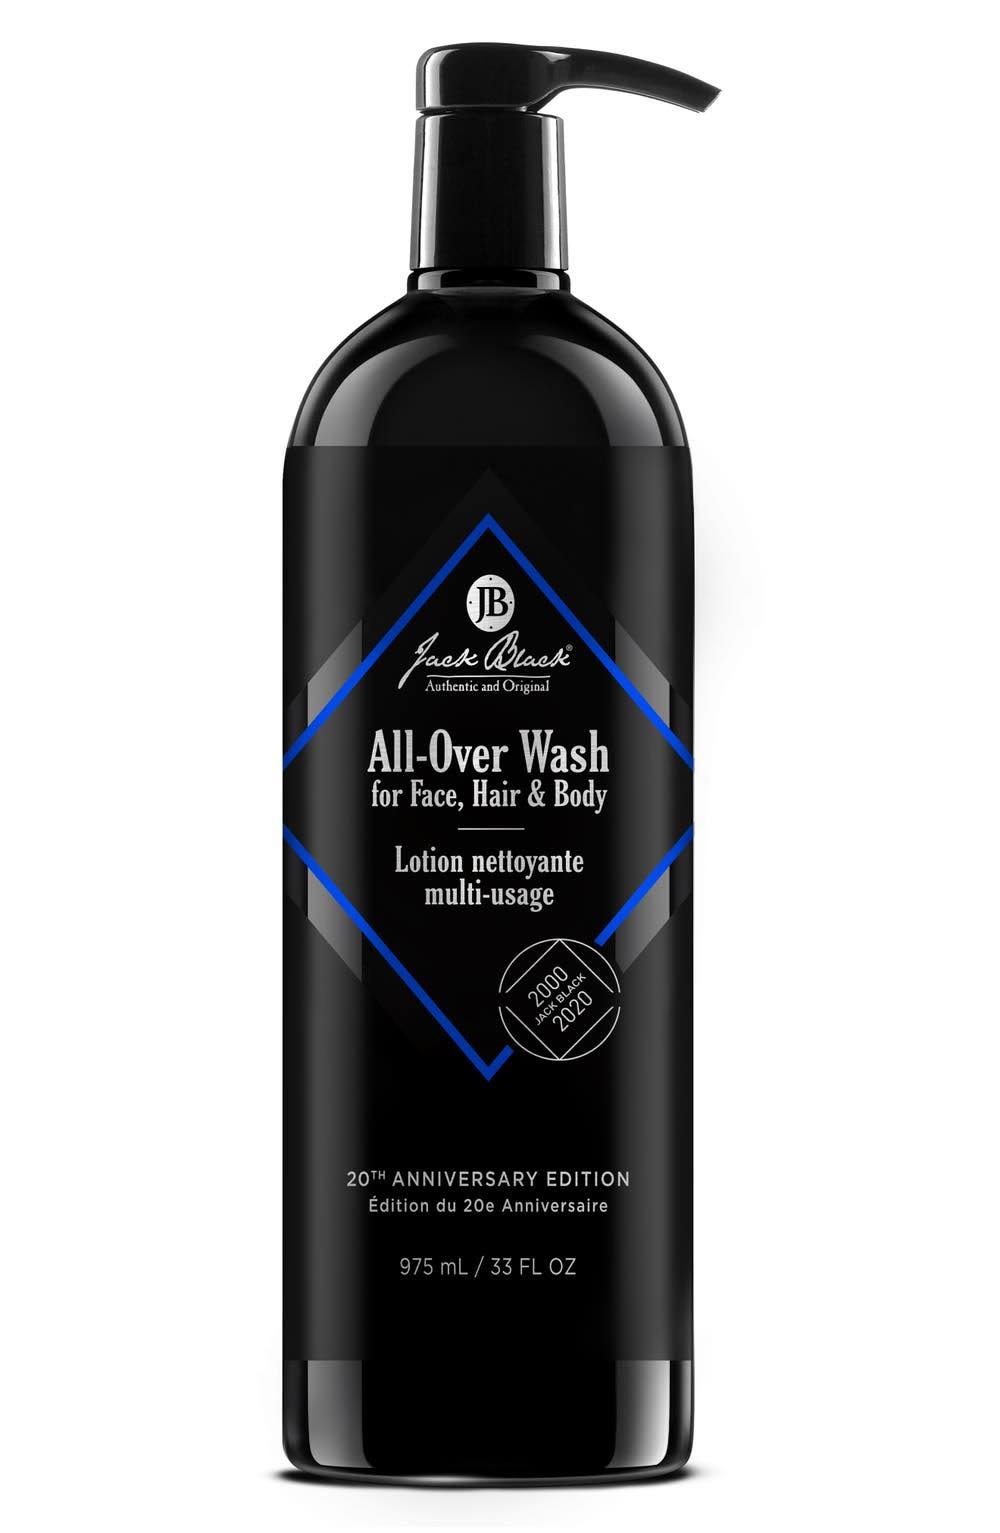 JACK Black All-Over Wash - 20th Anniversary Edition